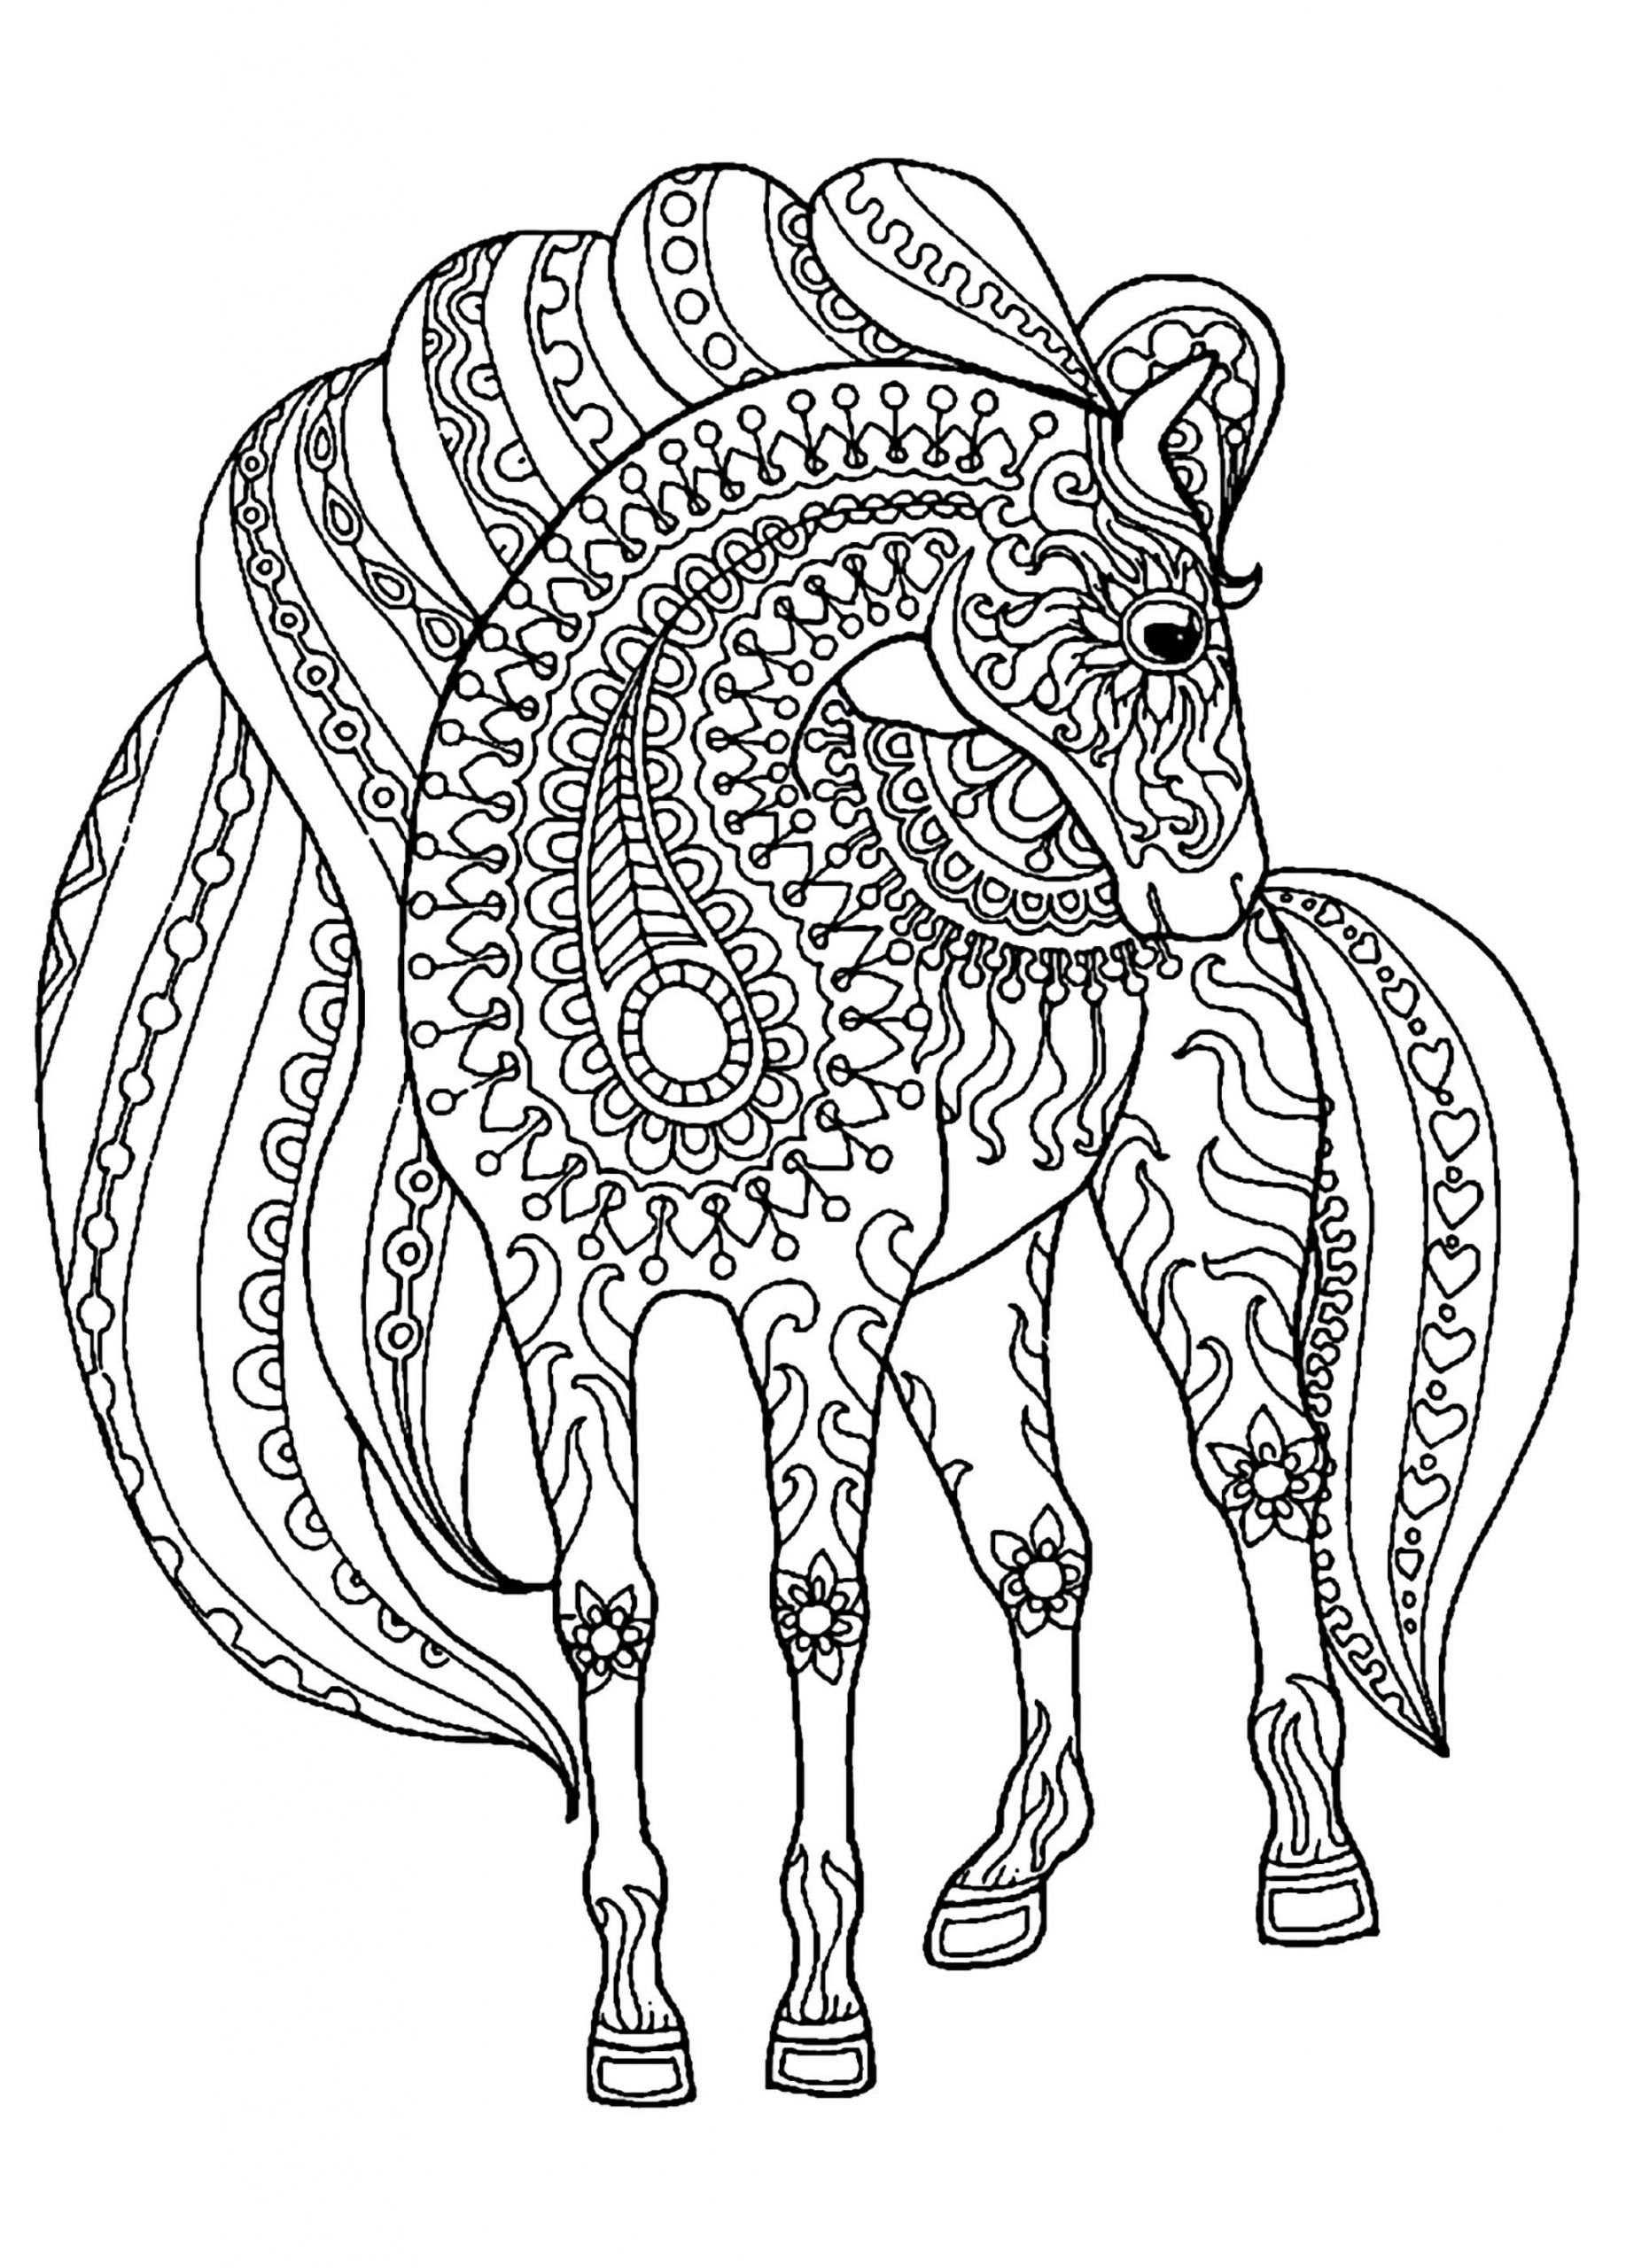 Printable Animal Coloring Pages For Adults
 Horse simple zentangle patterns Horses Adult Coloring Pages